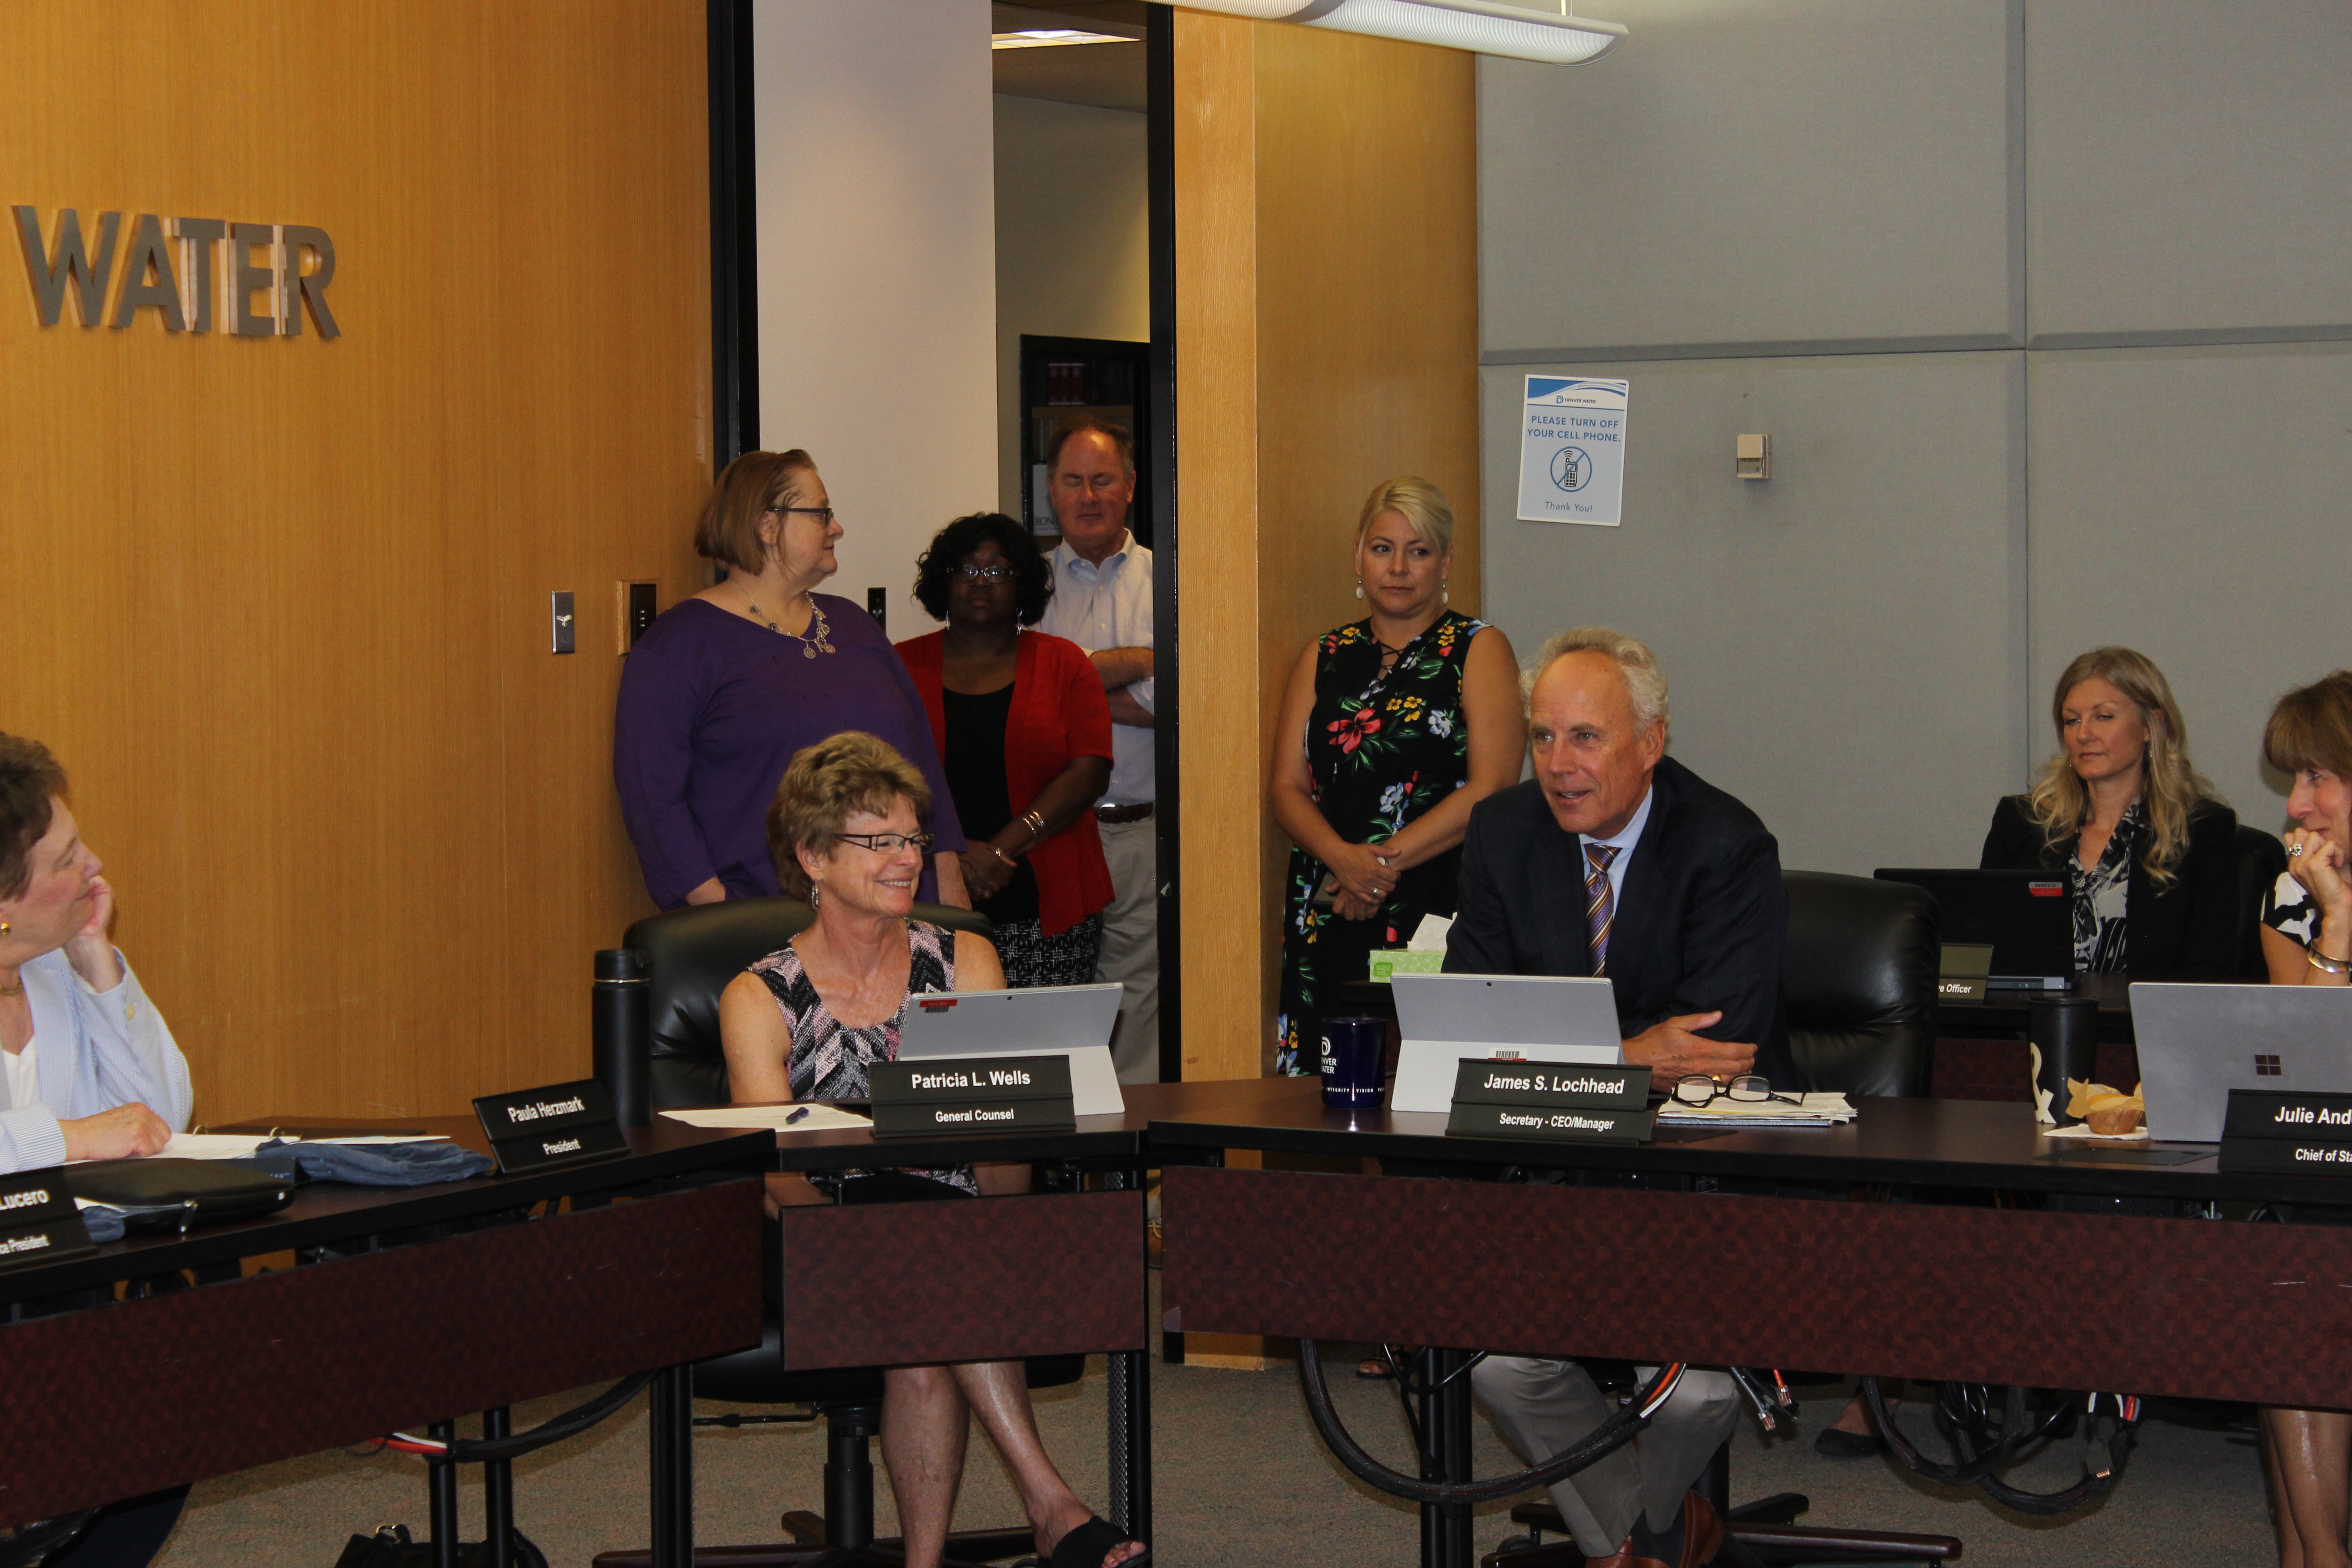 Patti Wells, who is retiring from her post as Denver Water’s general counsel, and Jim Lochhead, CEO of Denver Water.